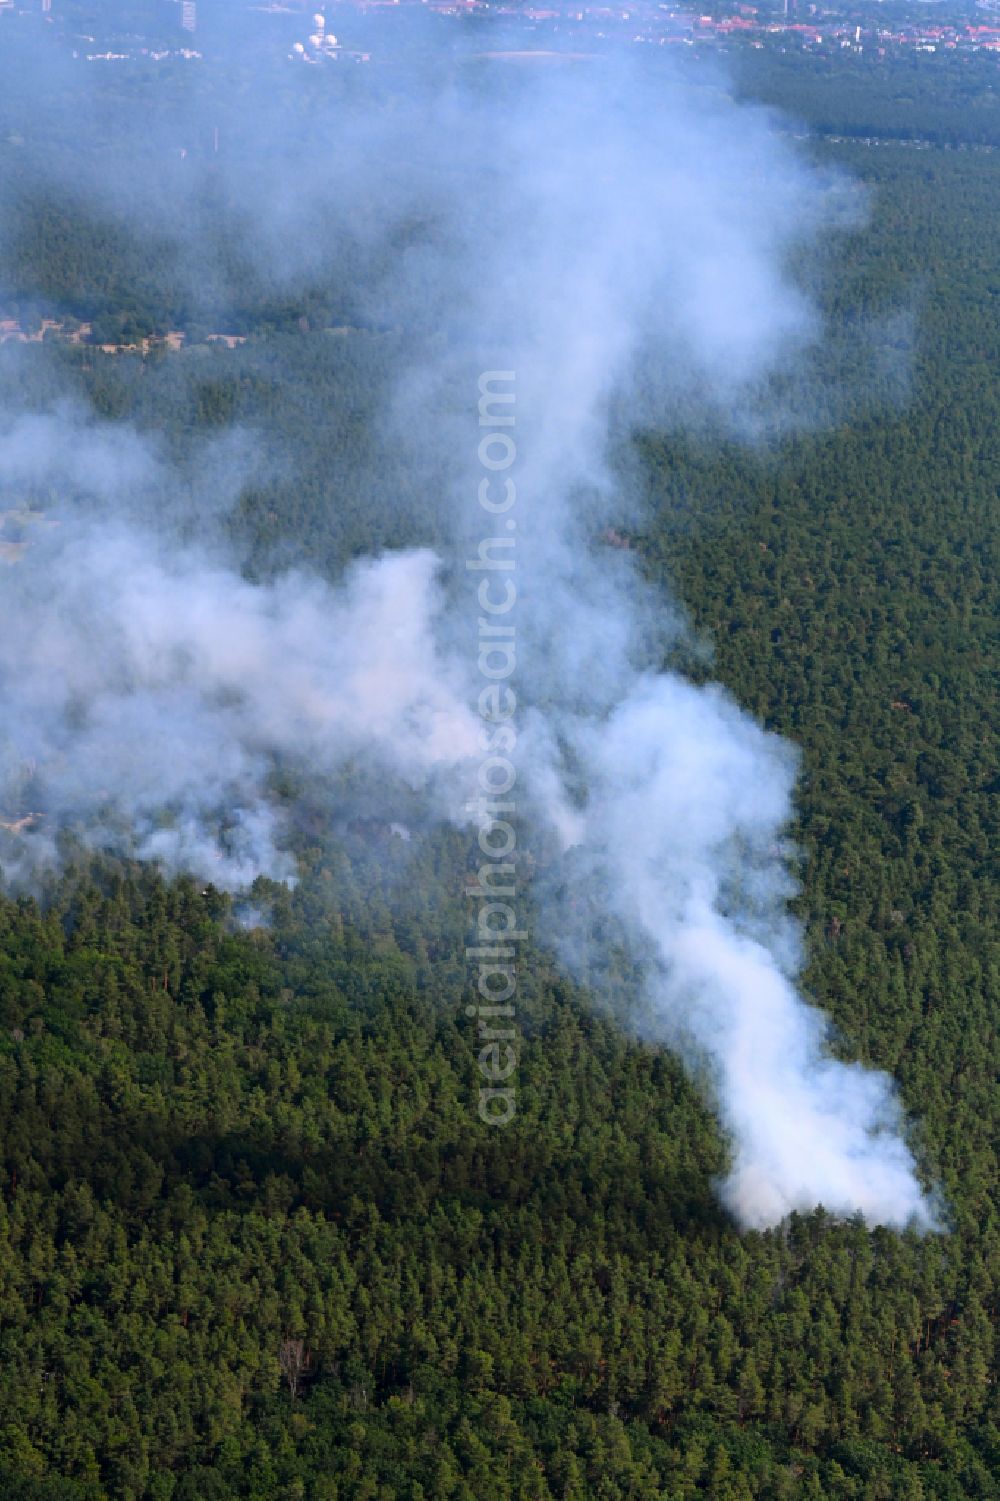 Aerial image Berlin - Puffs of smoke and spread of fire from a forest fire as a result of an explosion at a blast site in the trees of a forest area and forest area on the road Huettenweg - AVUS A100 in the Grunewald district in Berlin, Germany